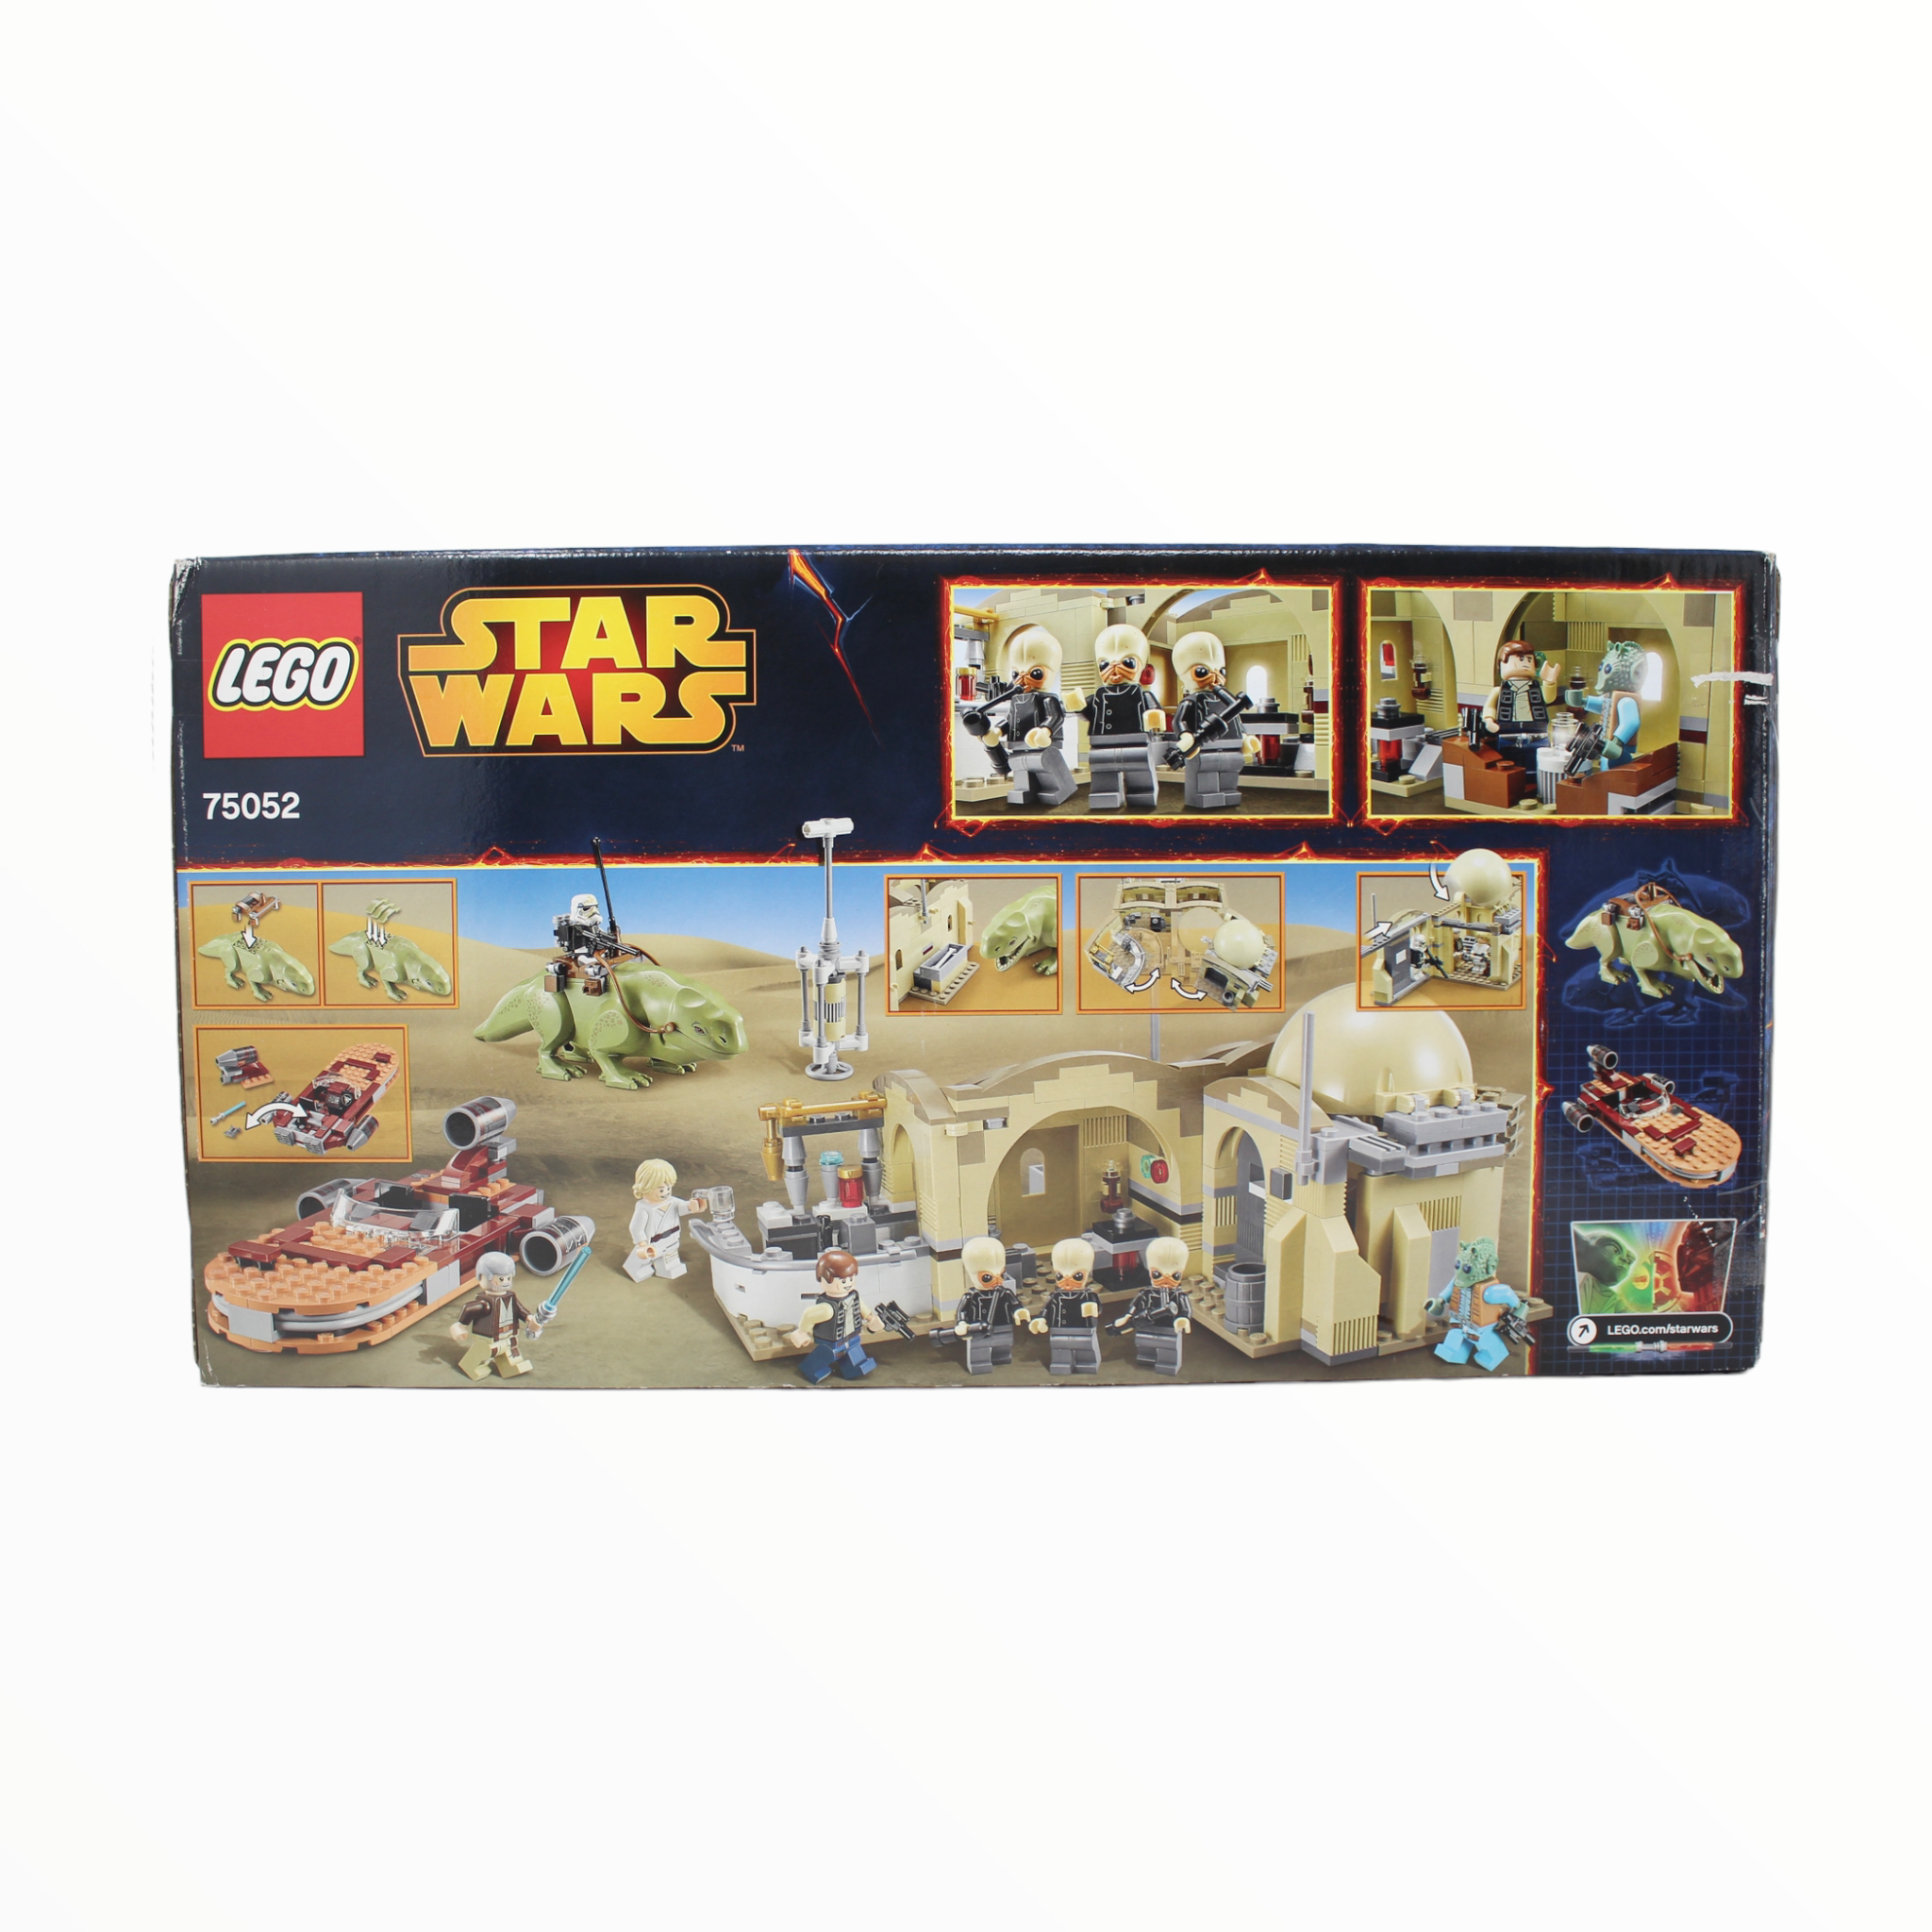 Certified Used Set 75052 Star Wars Mos Eisley Cantina (2014)